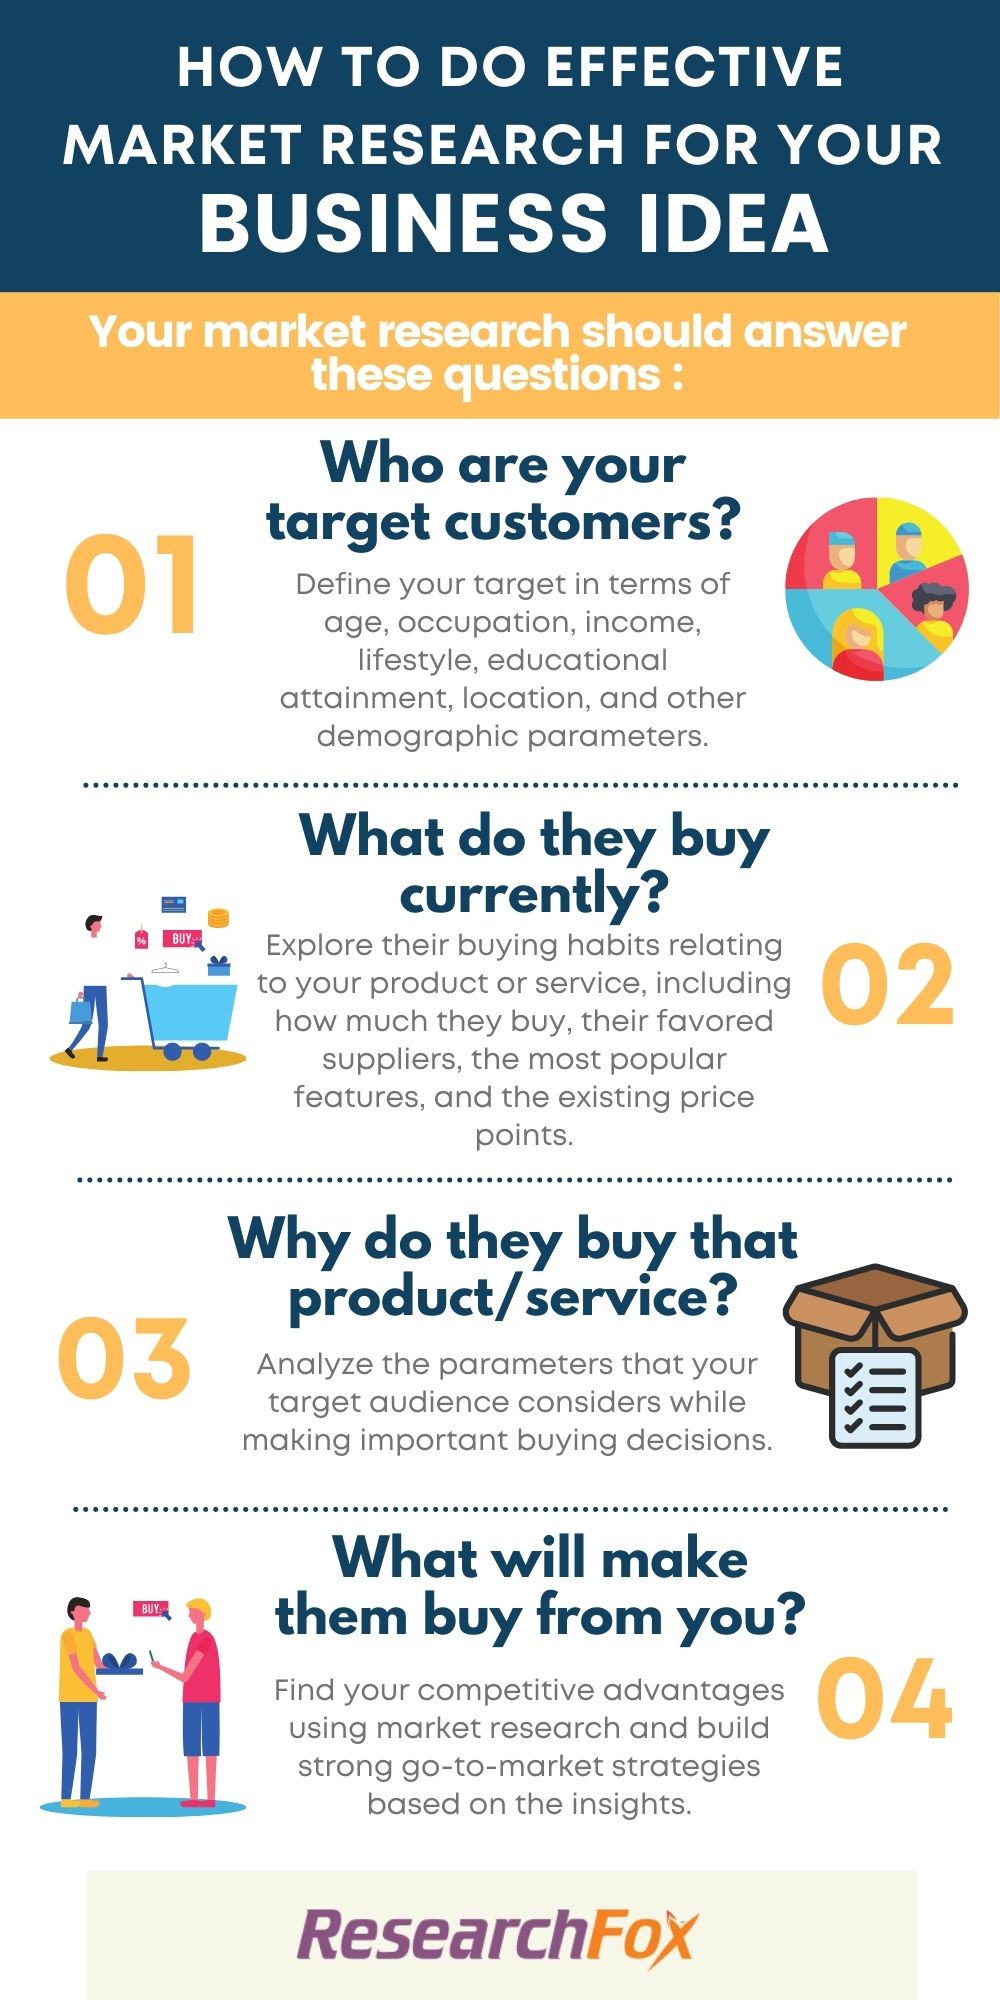 how to do market research for your business idea - infographic